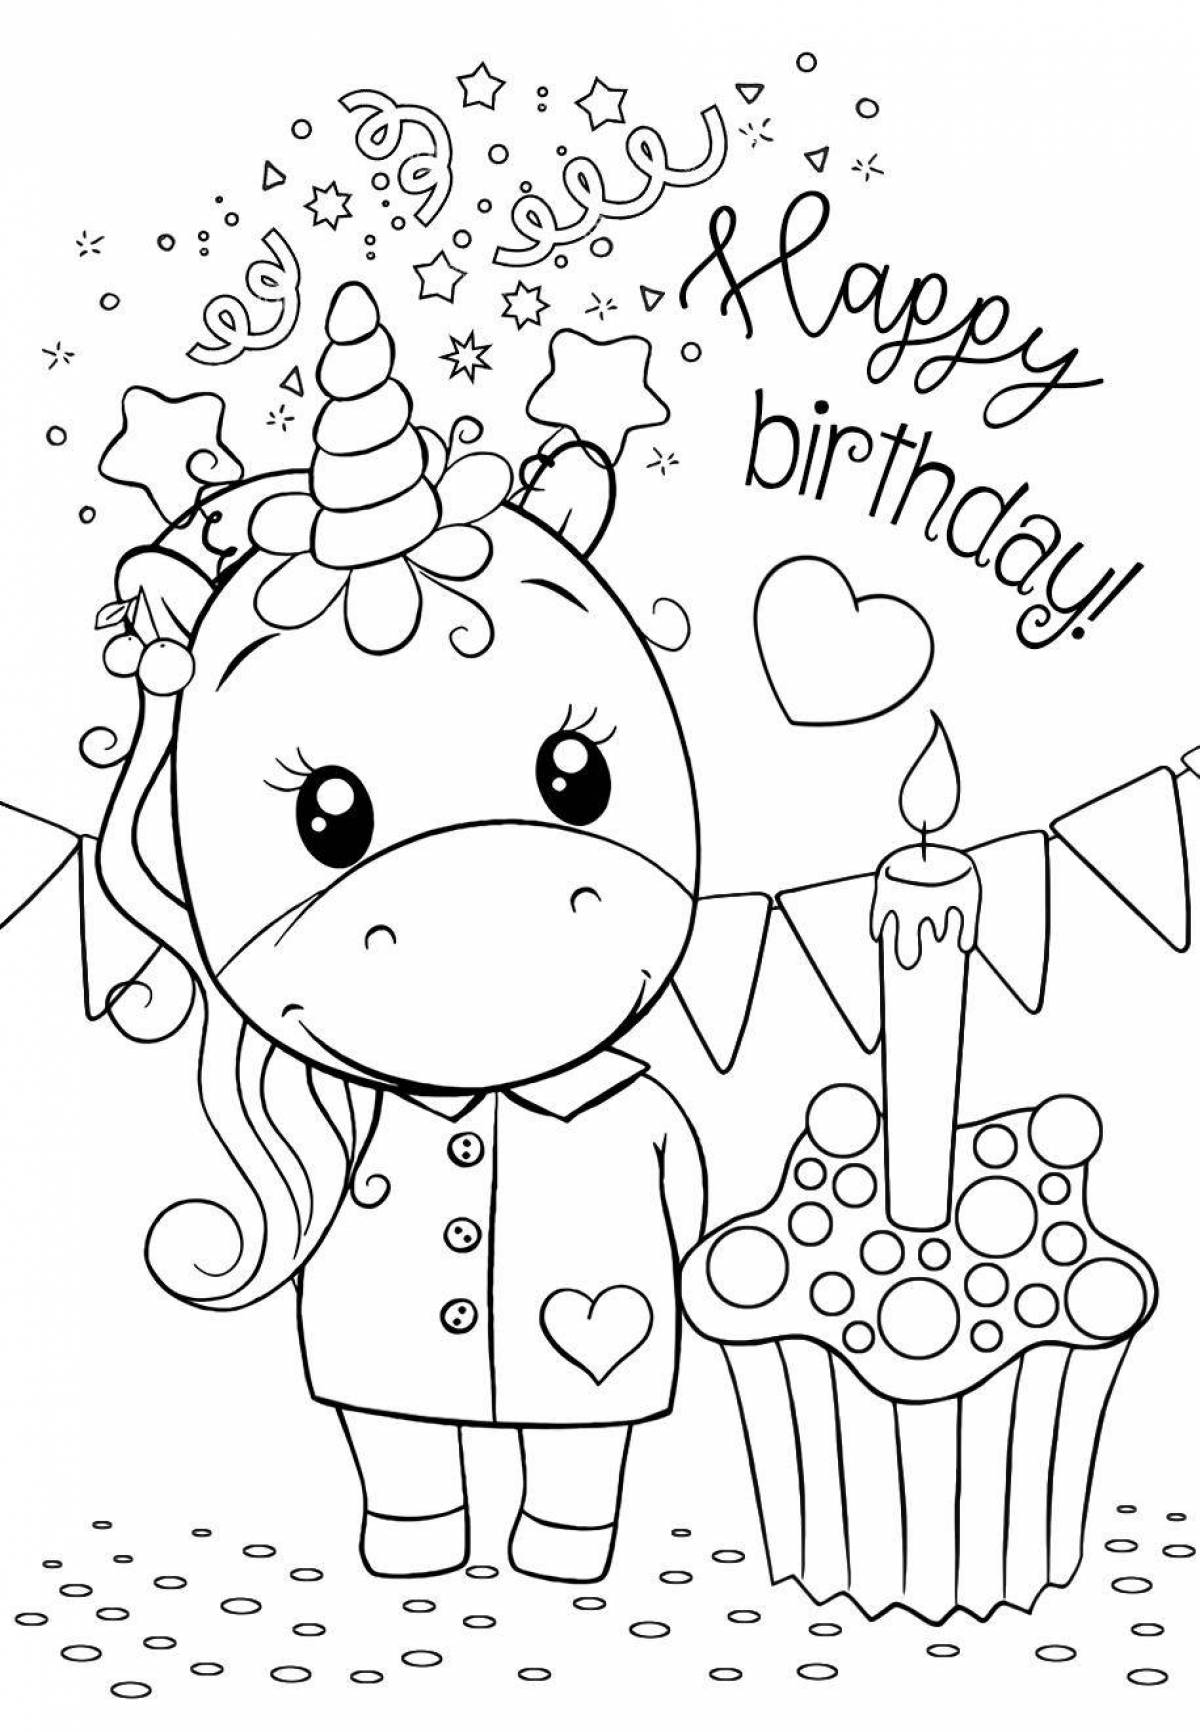 Joyful coloring book for a friend's birthday